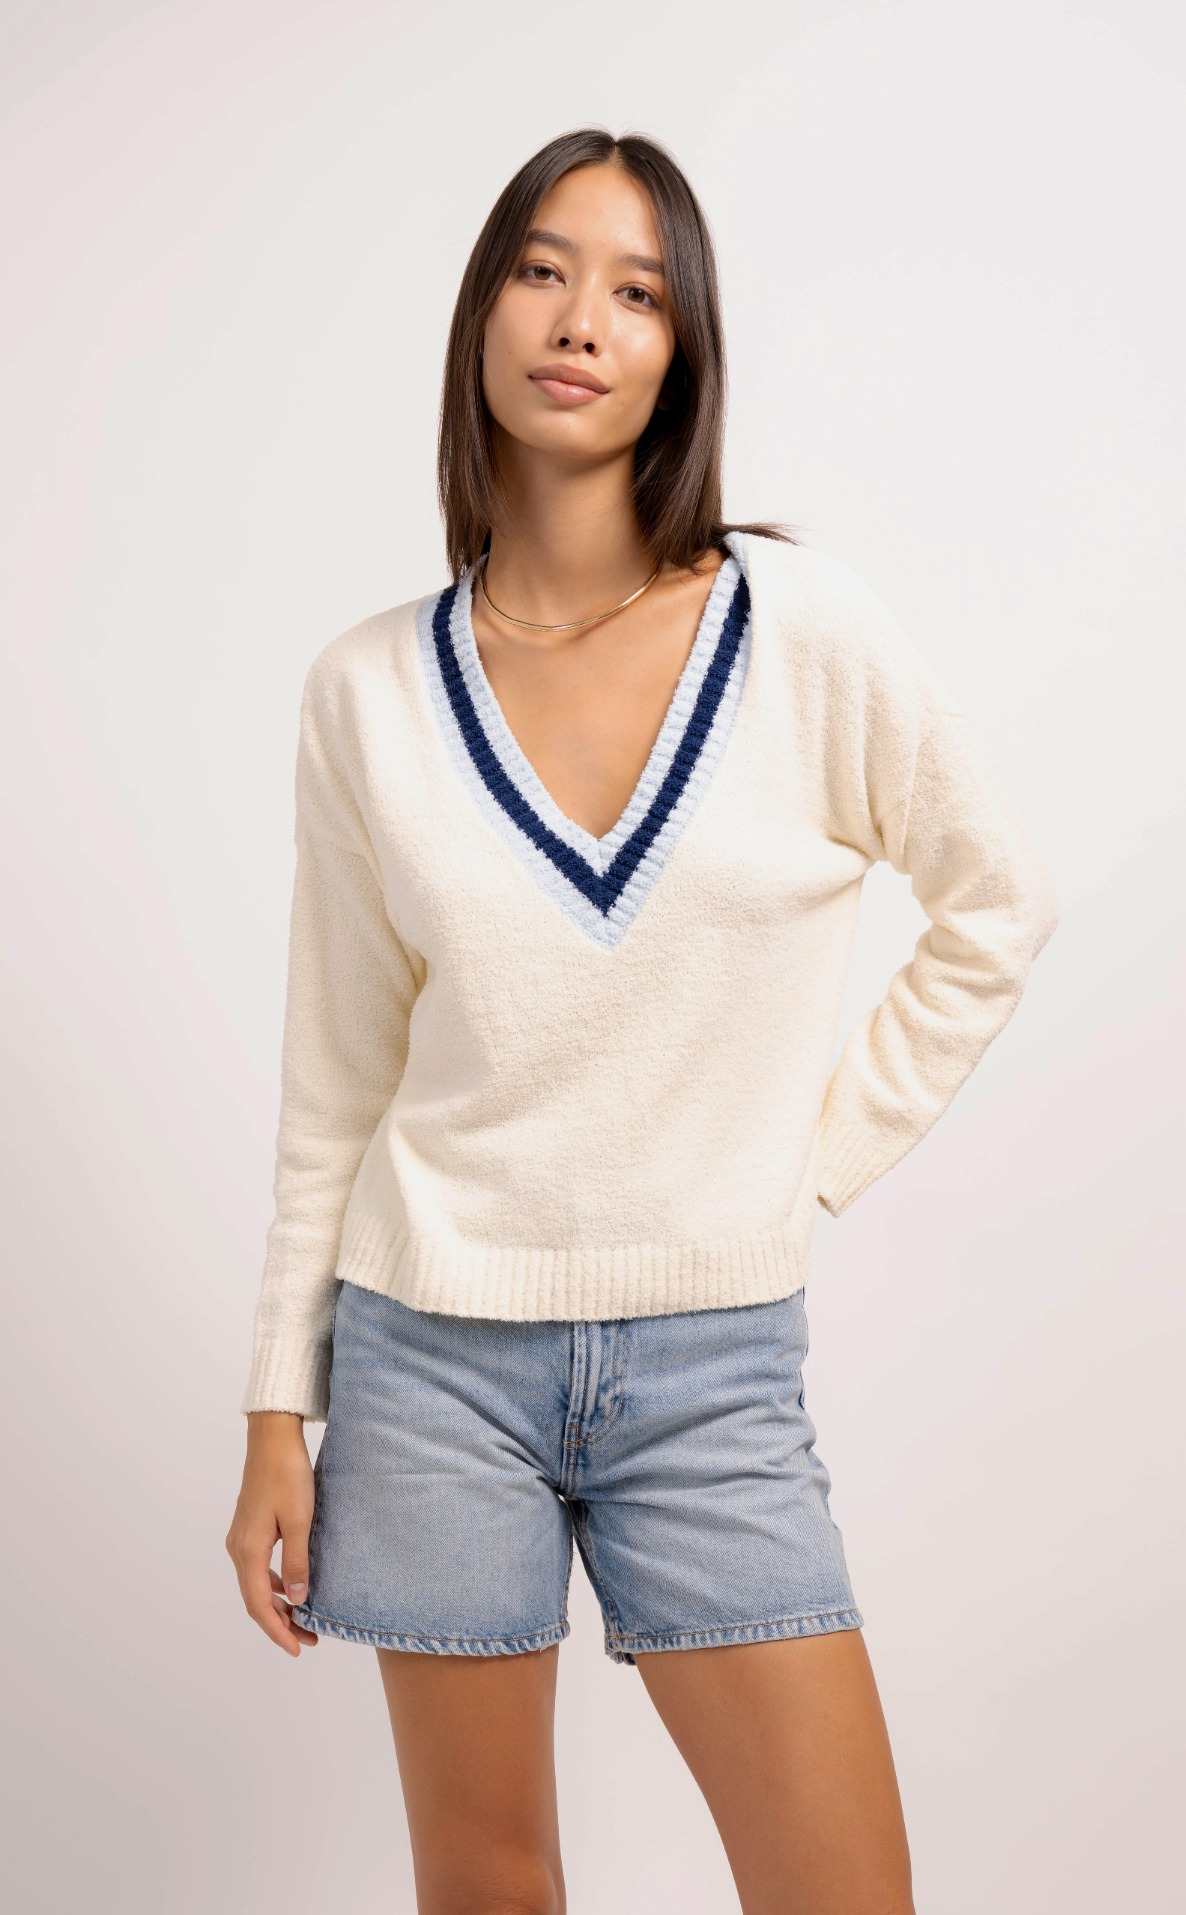 Central Park West. Bianca V-neck sweater, long sleeve, warm cozy, women's sweater, Mackinac Island boutique